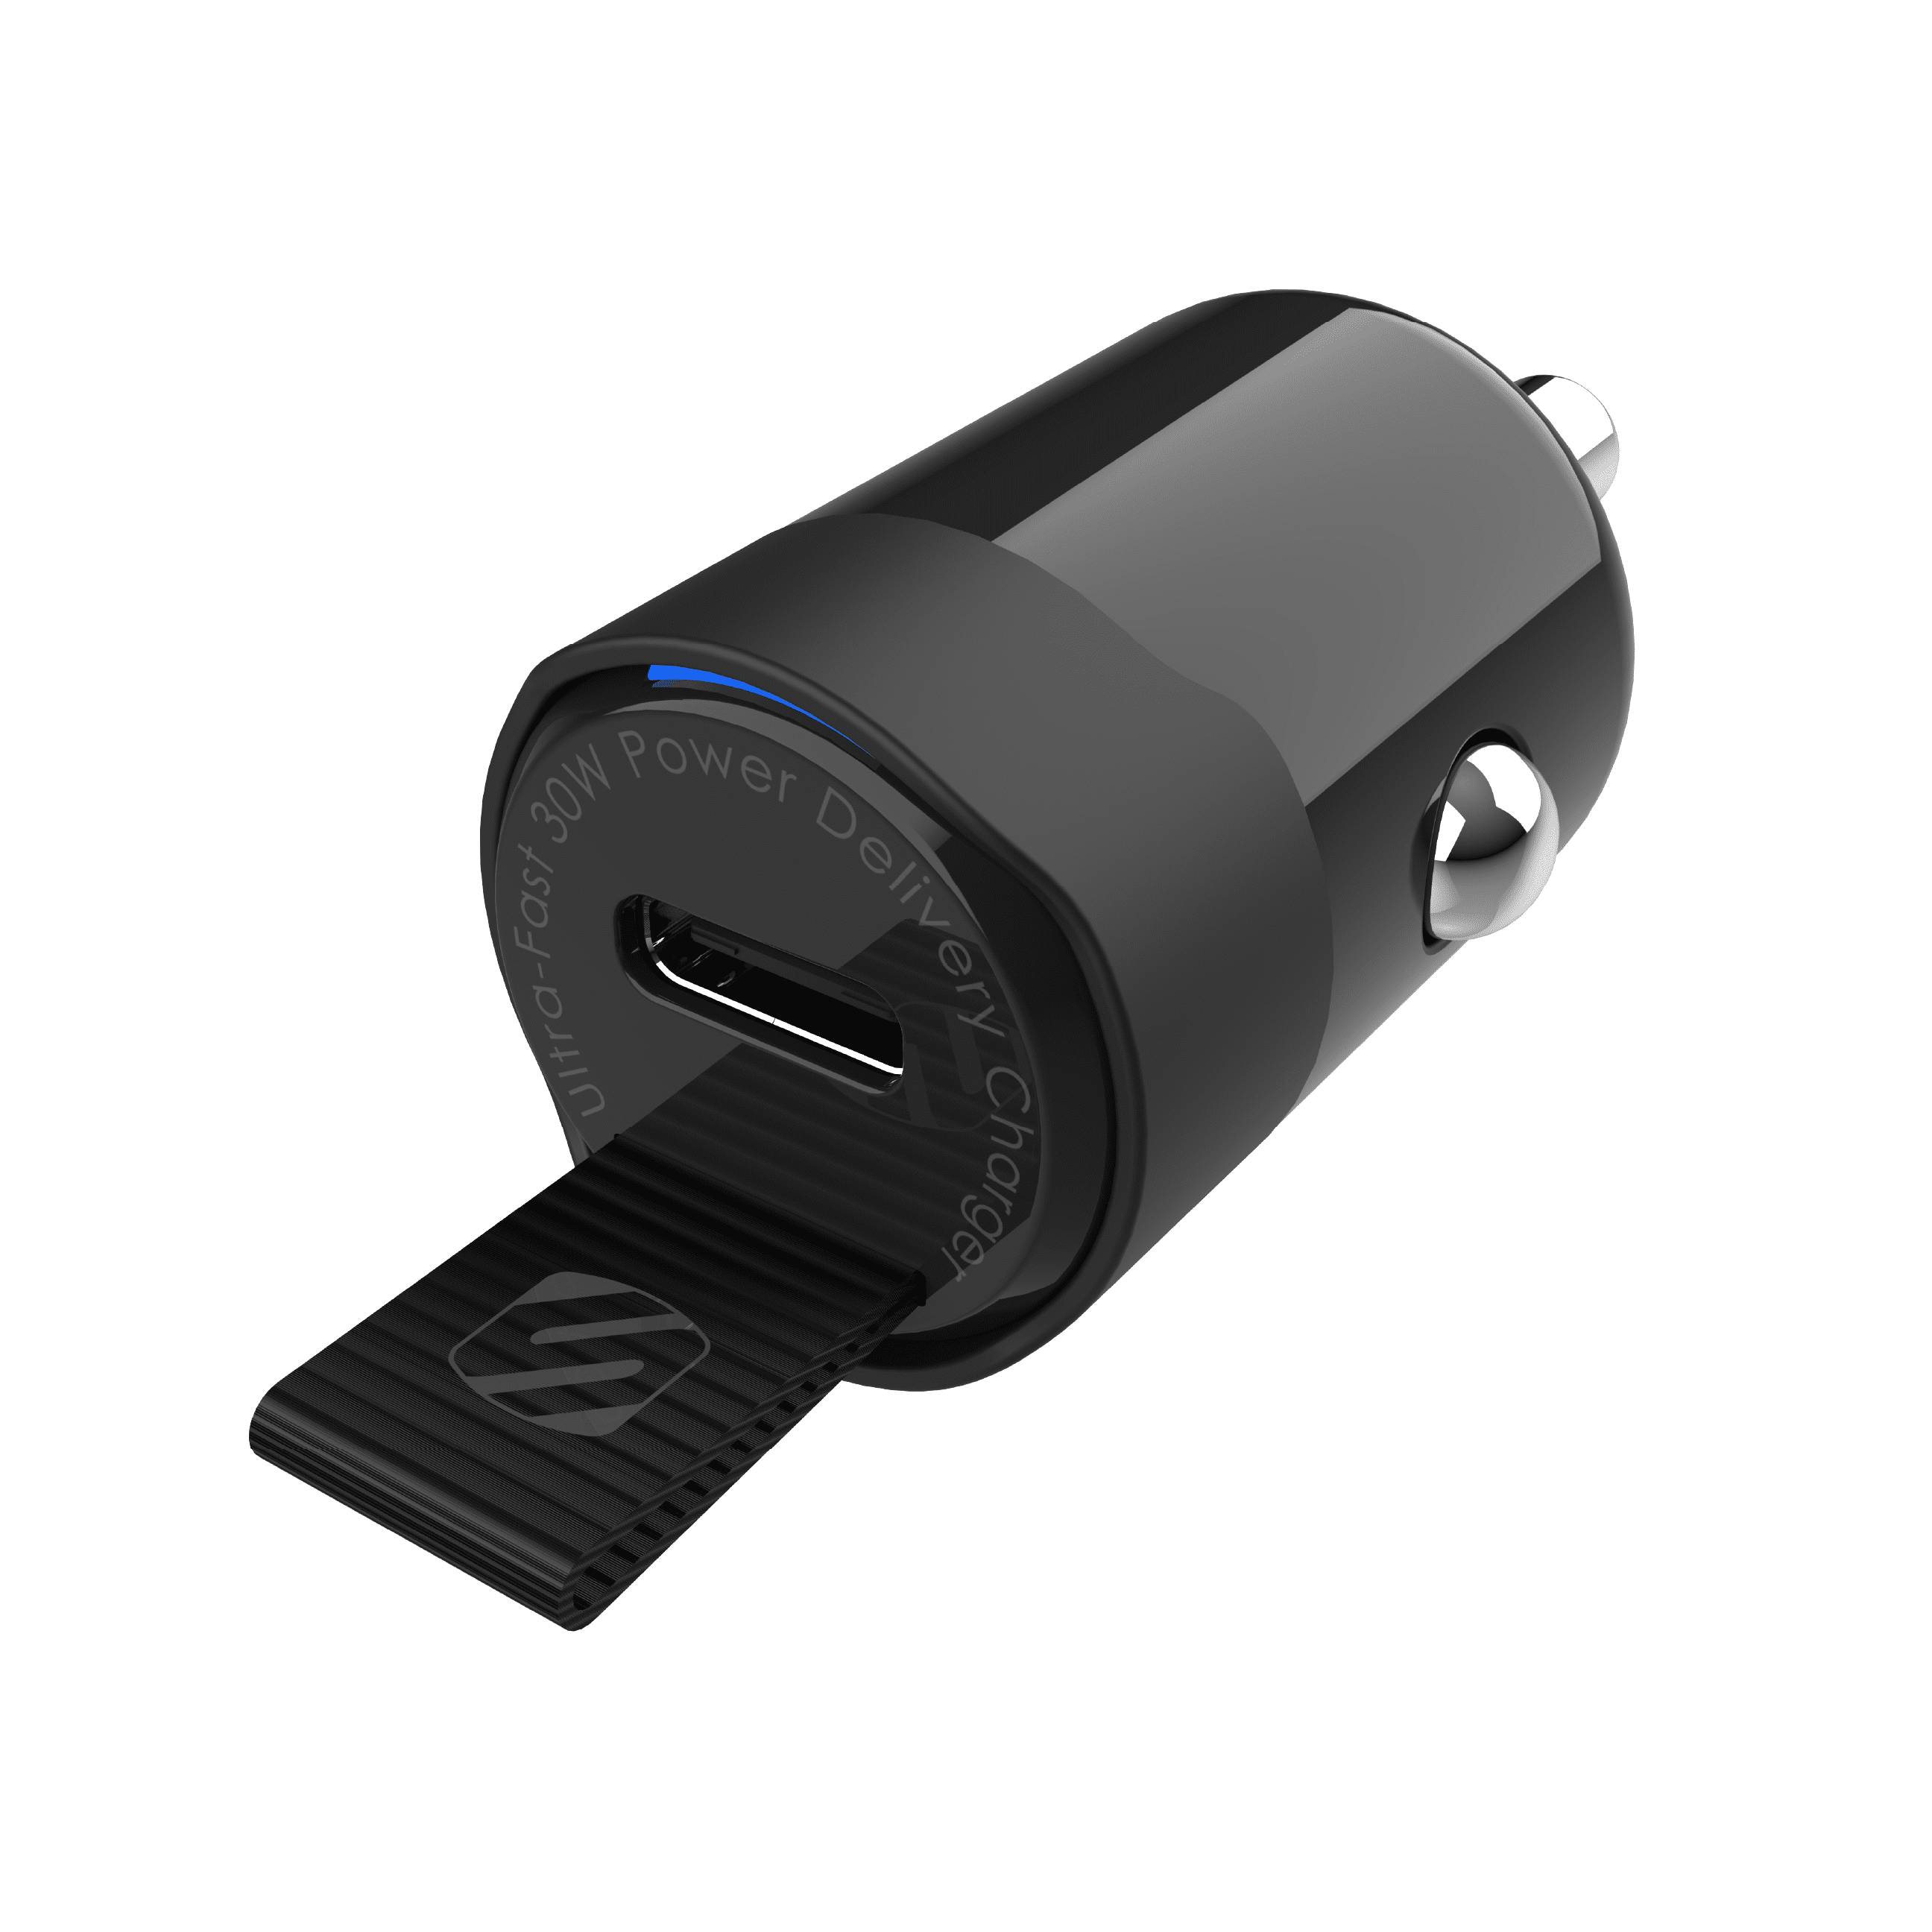 Scosche CPDC30-RP1 PowerVolt Flush Fit Mini Car Charger, USB-C Single Port Fast 30W Power Delivery